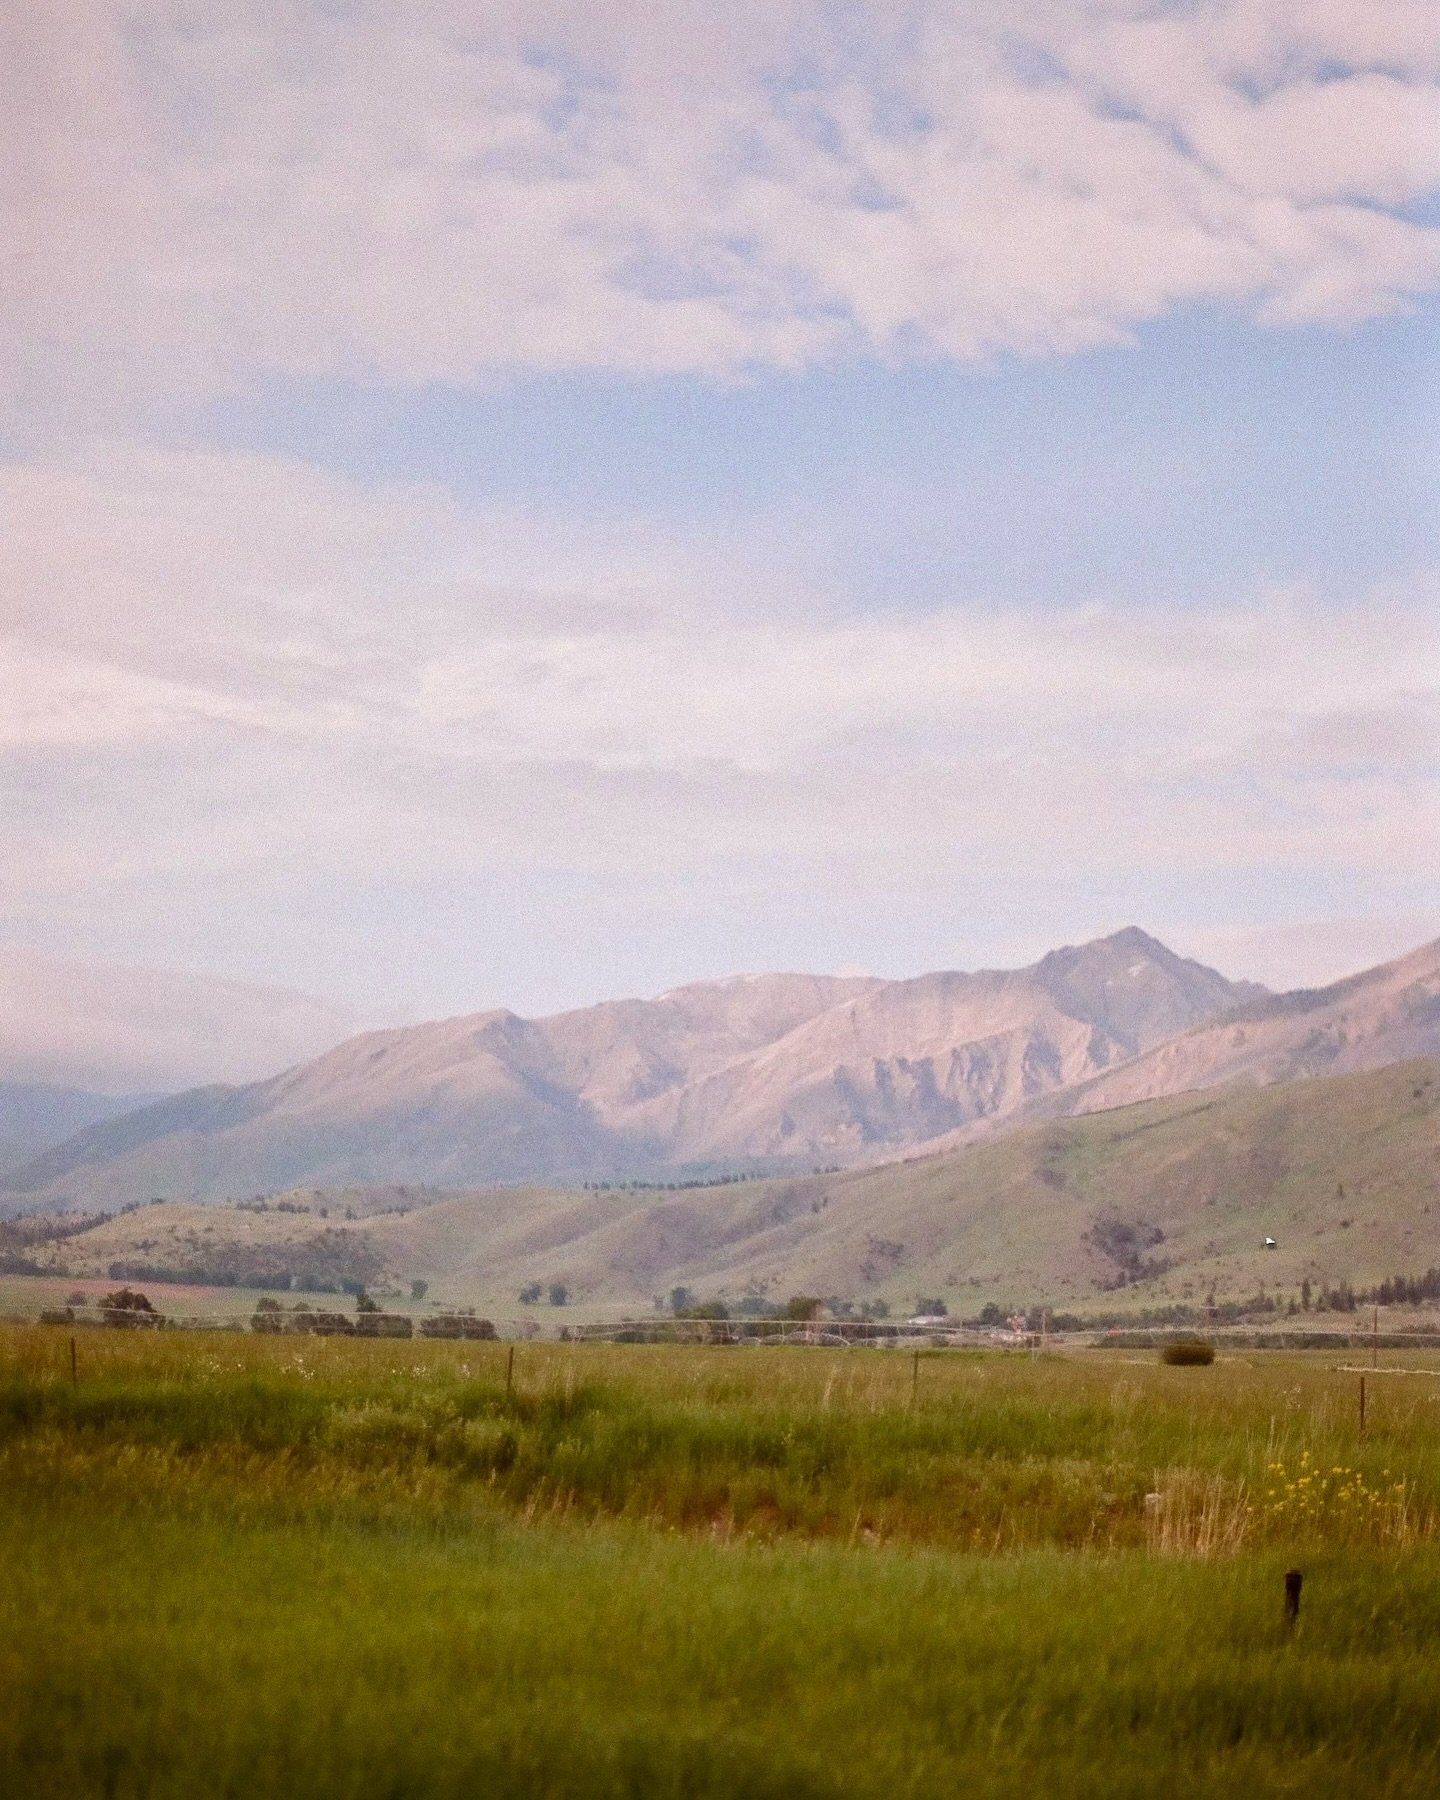 Montana in June 2023 snapped on 35mm film using my Nikon FM2 📷